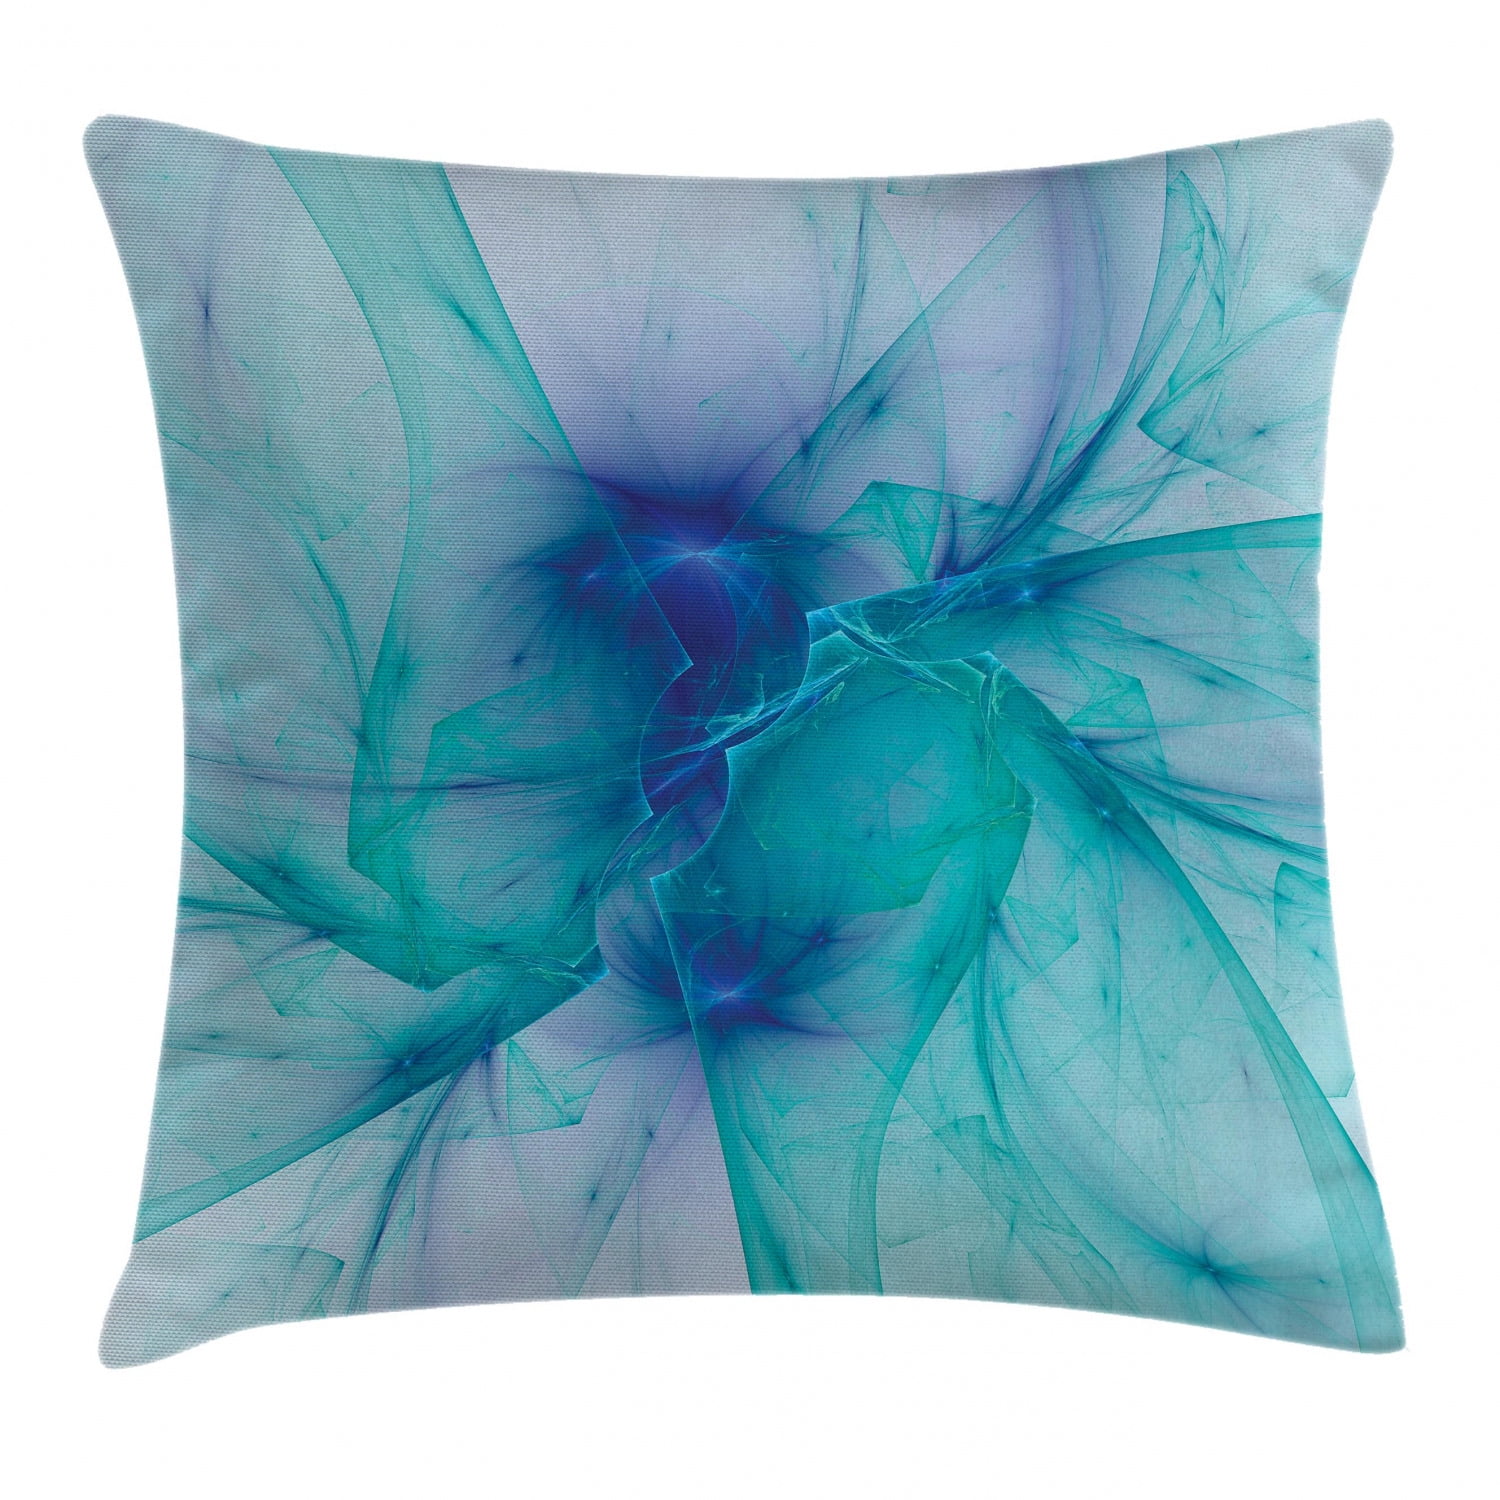 Ambesonne Spires Decor Throw Pillow Cushion Cover 16 X 16 Inches Decorative Square Accent Pillow Case Flower Shaped Spiral Digital Vortex Pattern with Hazy Colored Elements Art Image Teal 